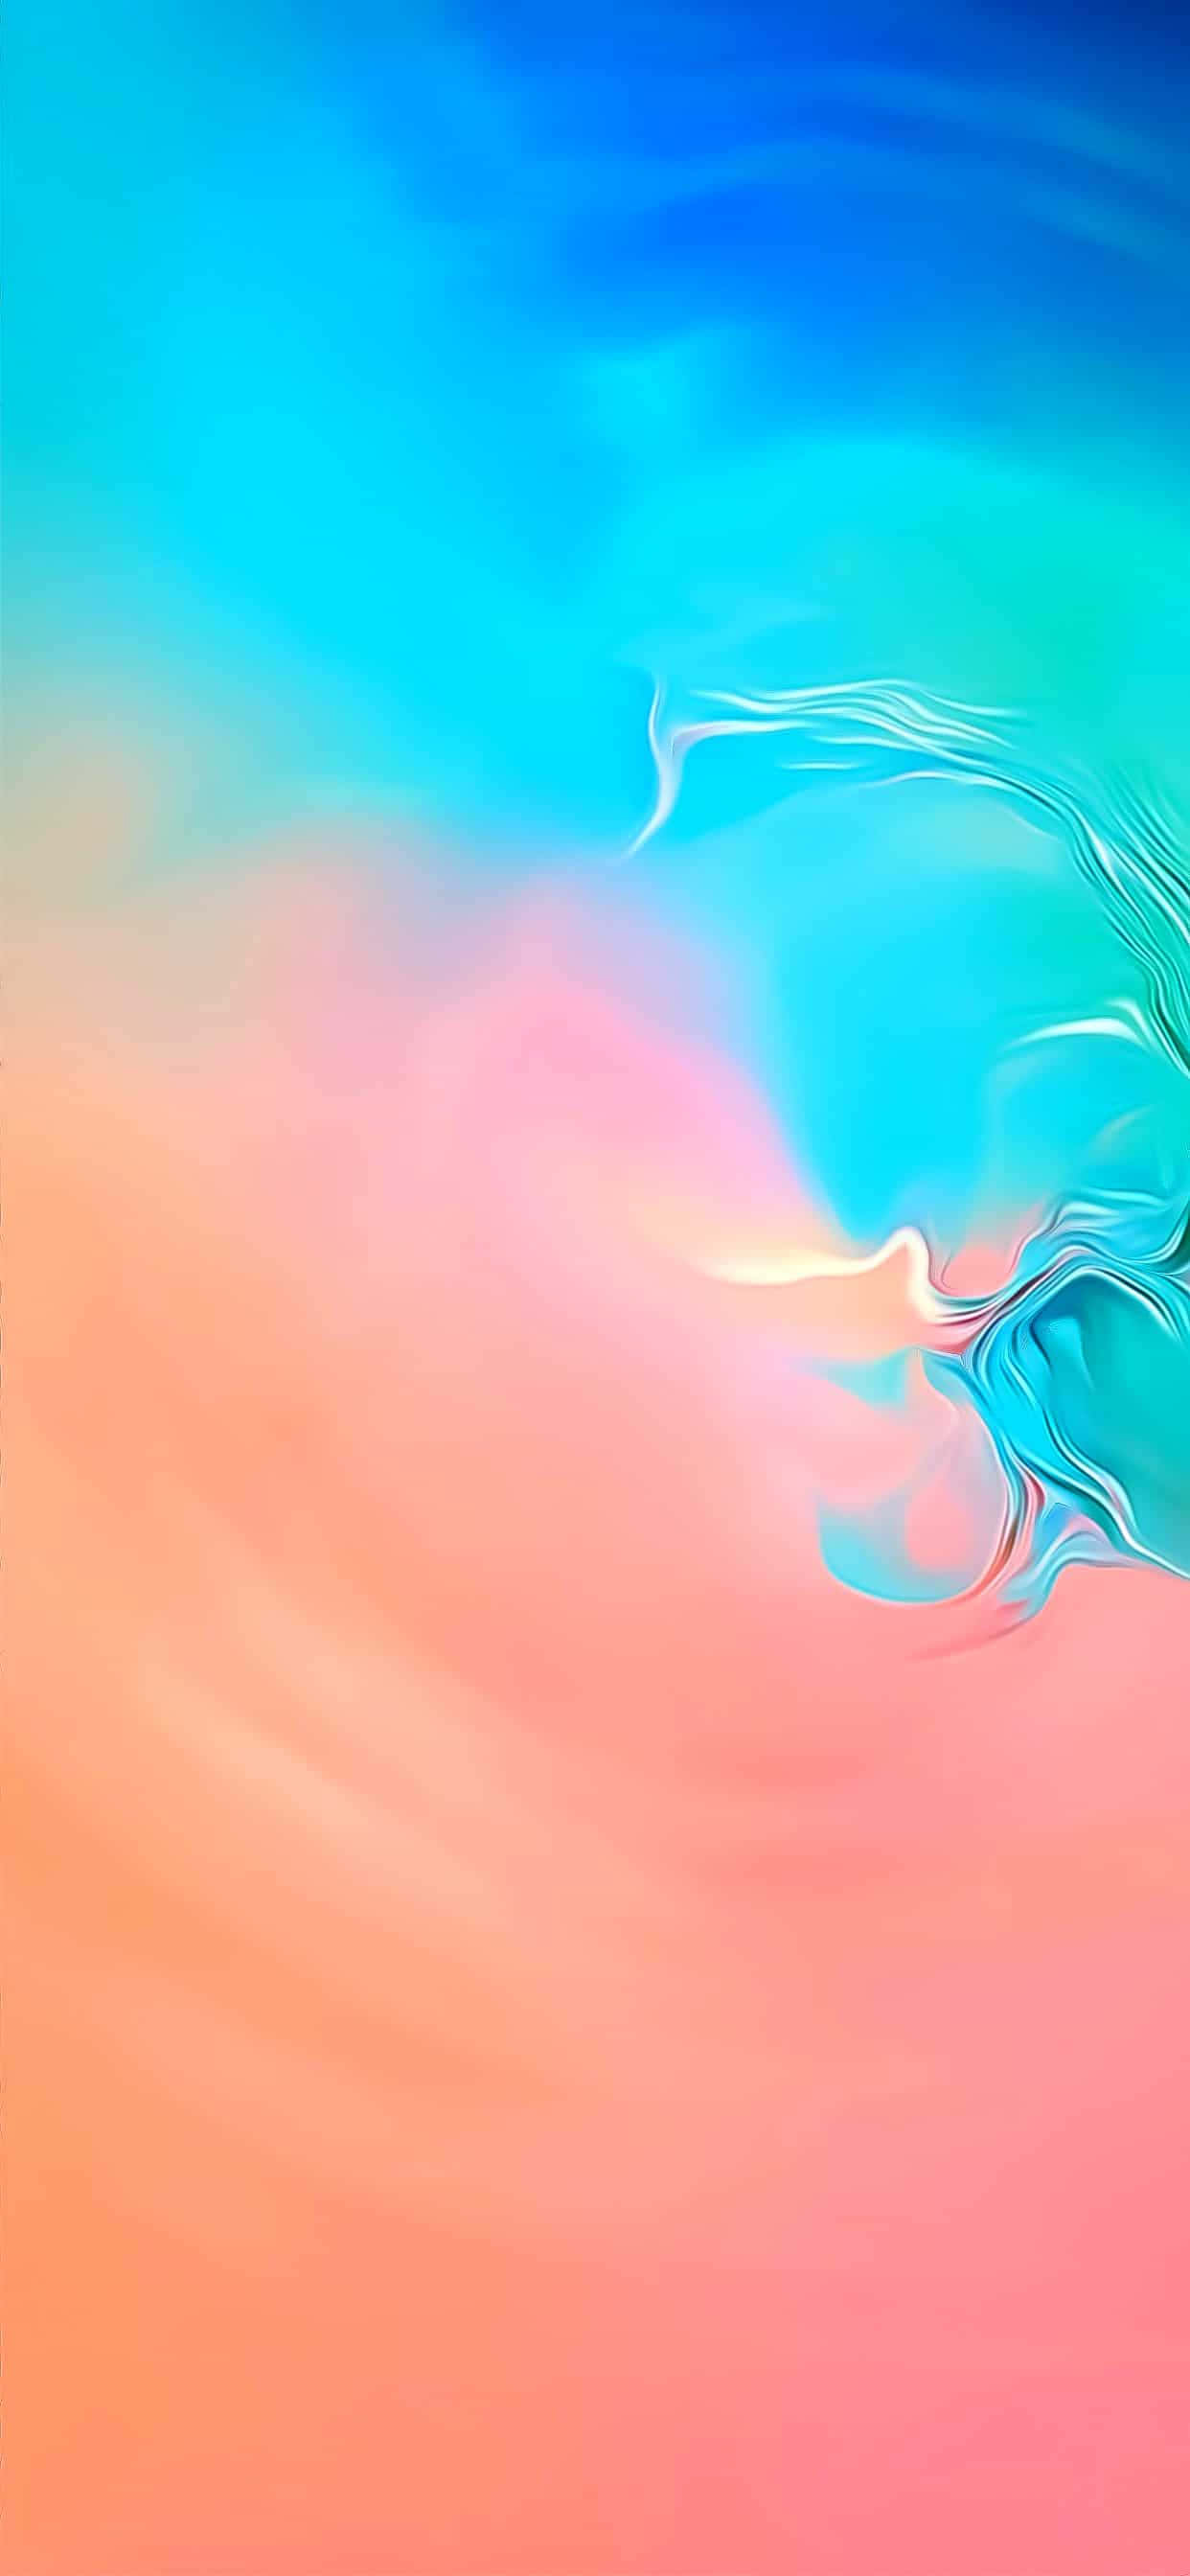 Stunning Galaxy S10 wallpaper featuring a vibrant abstract design